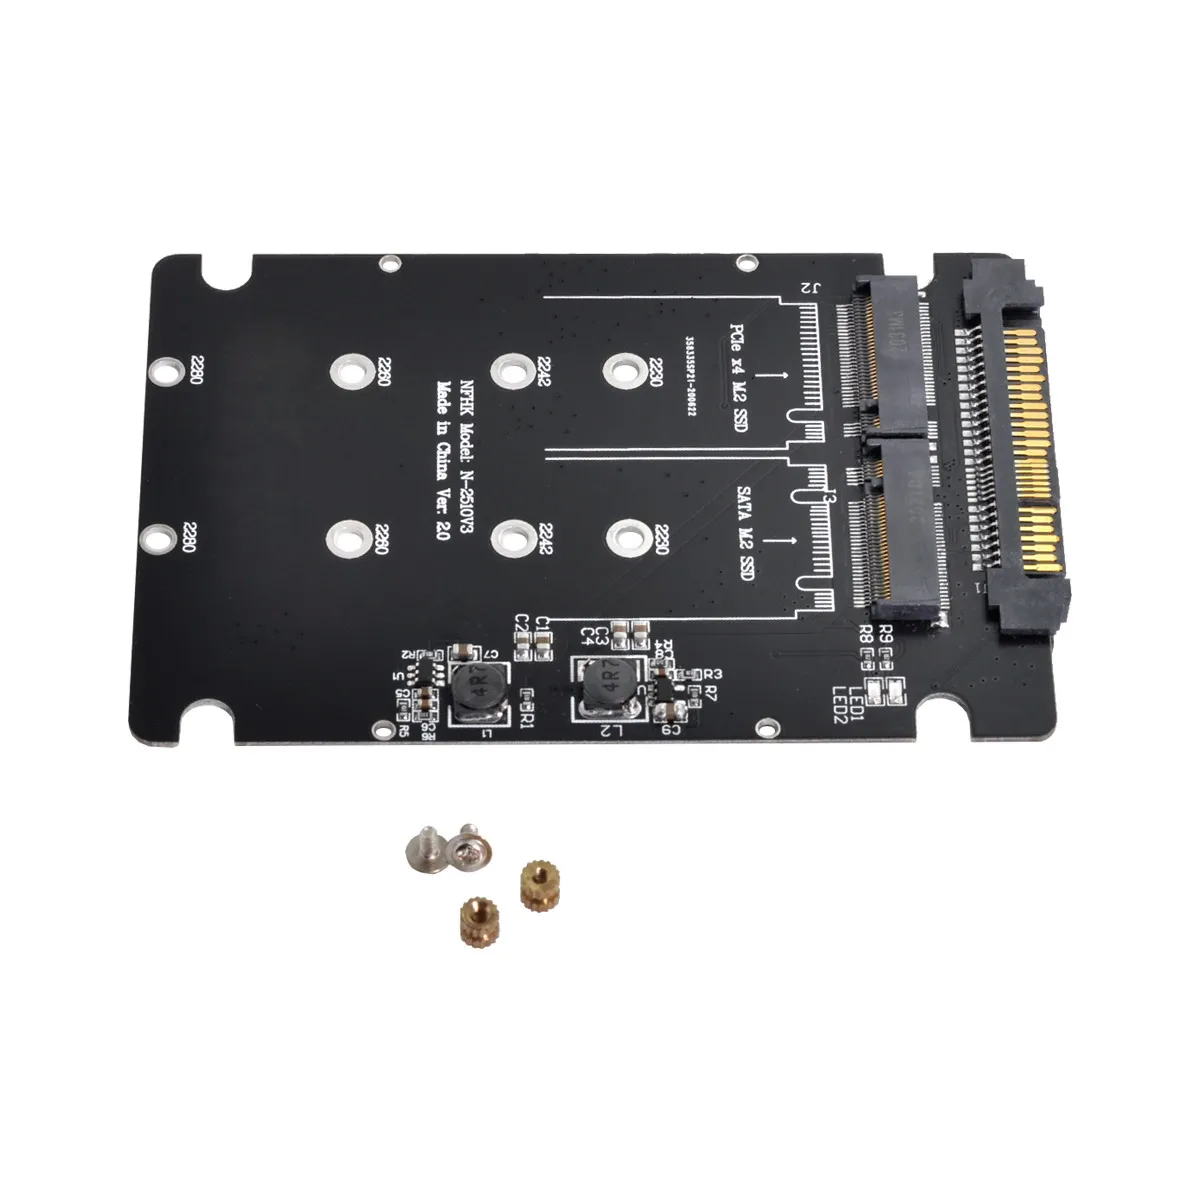 

CY Zihan SFF-8639 NVME U.2 to Combo NGFF M.2 M-key SATA PCIe SSD Adapter for Mainboard Replace SSD 750 p3600 p3700